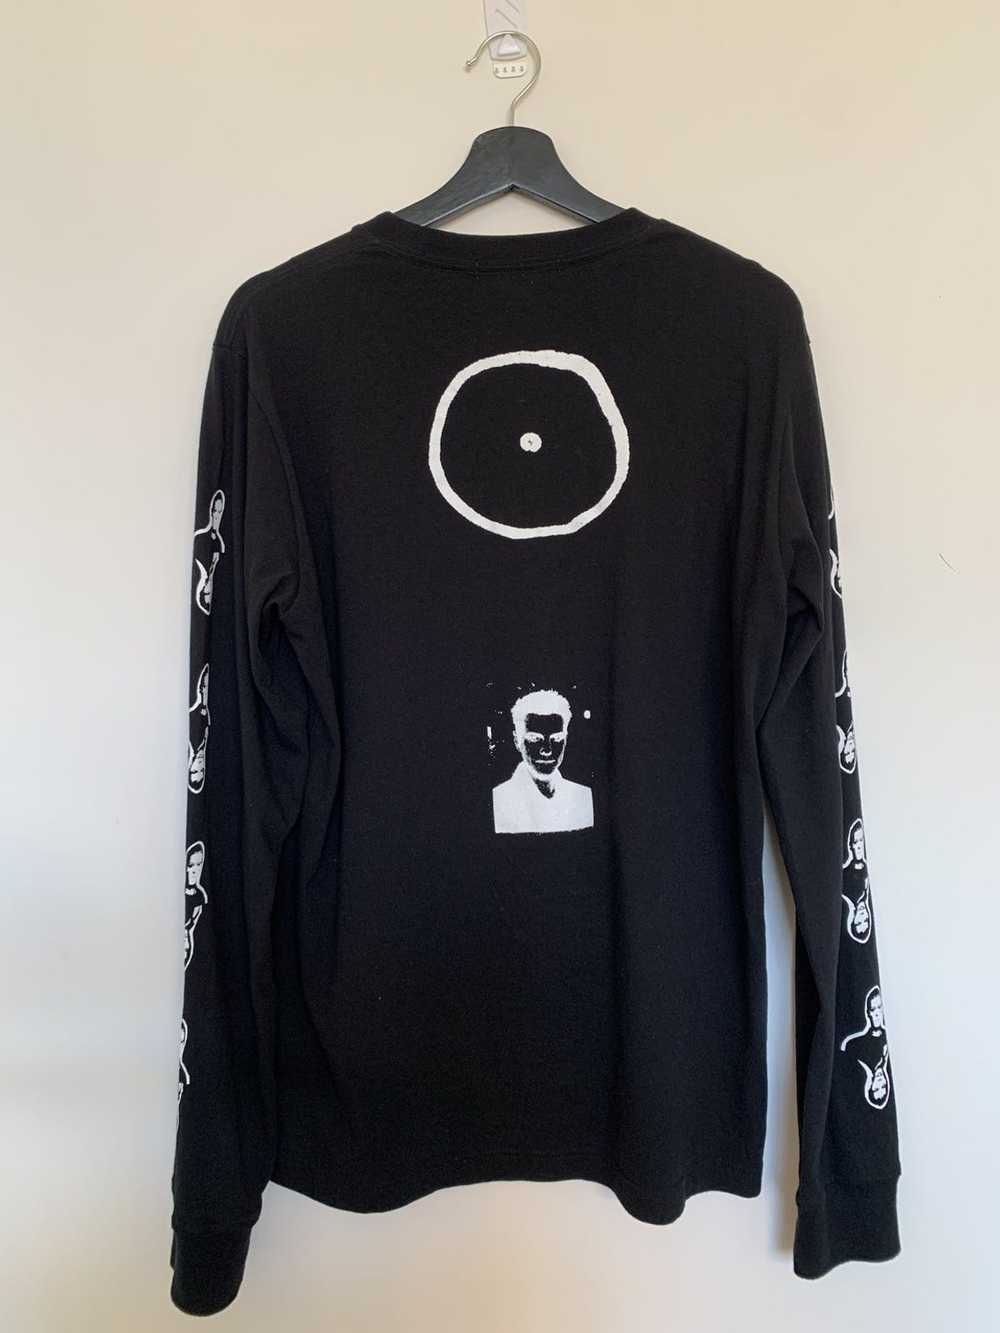 Undercover Undercover Smiley Face Long Sleeve Tee - image 2